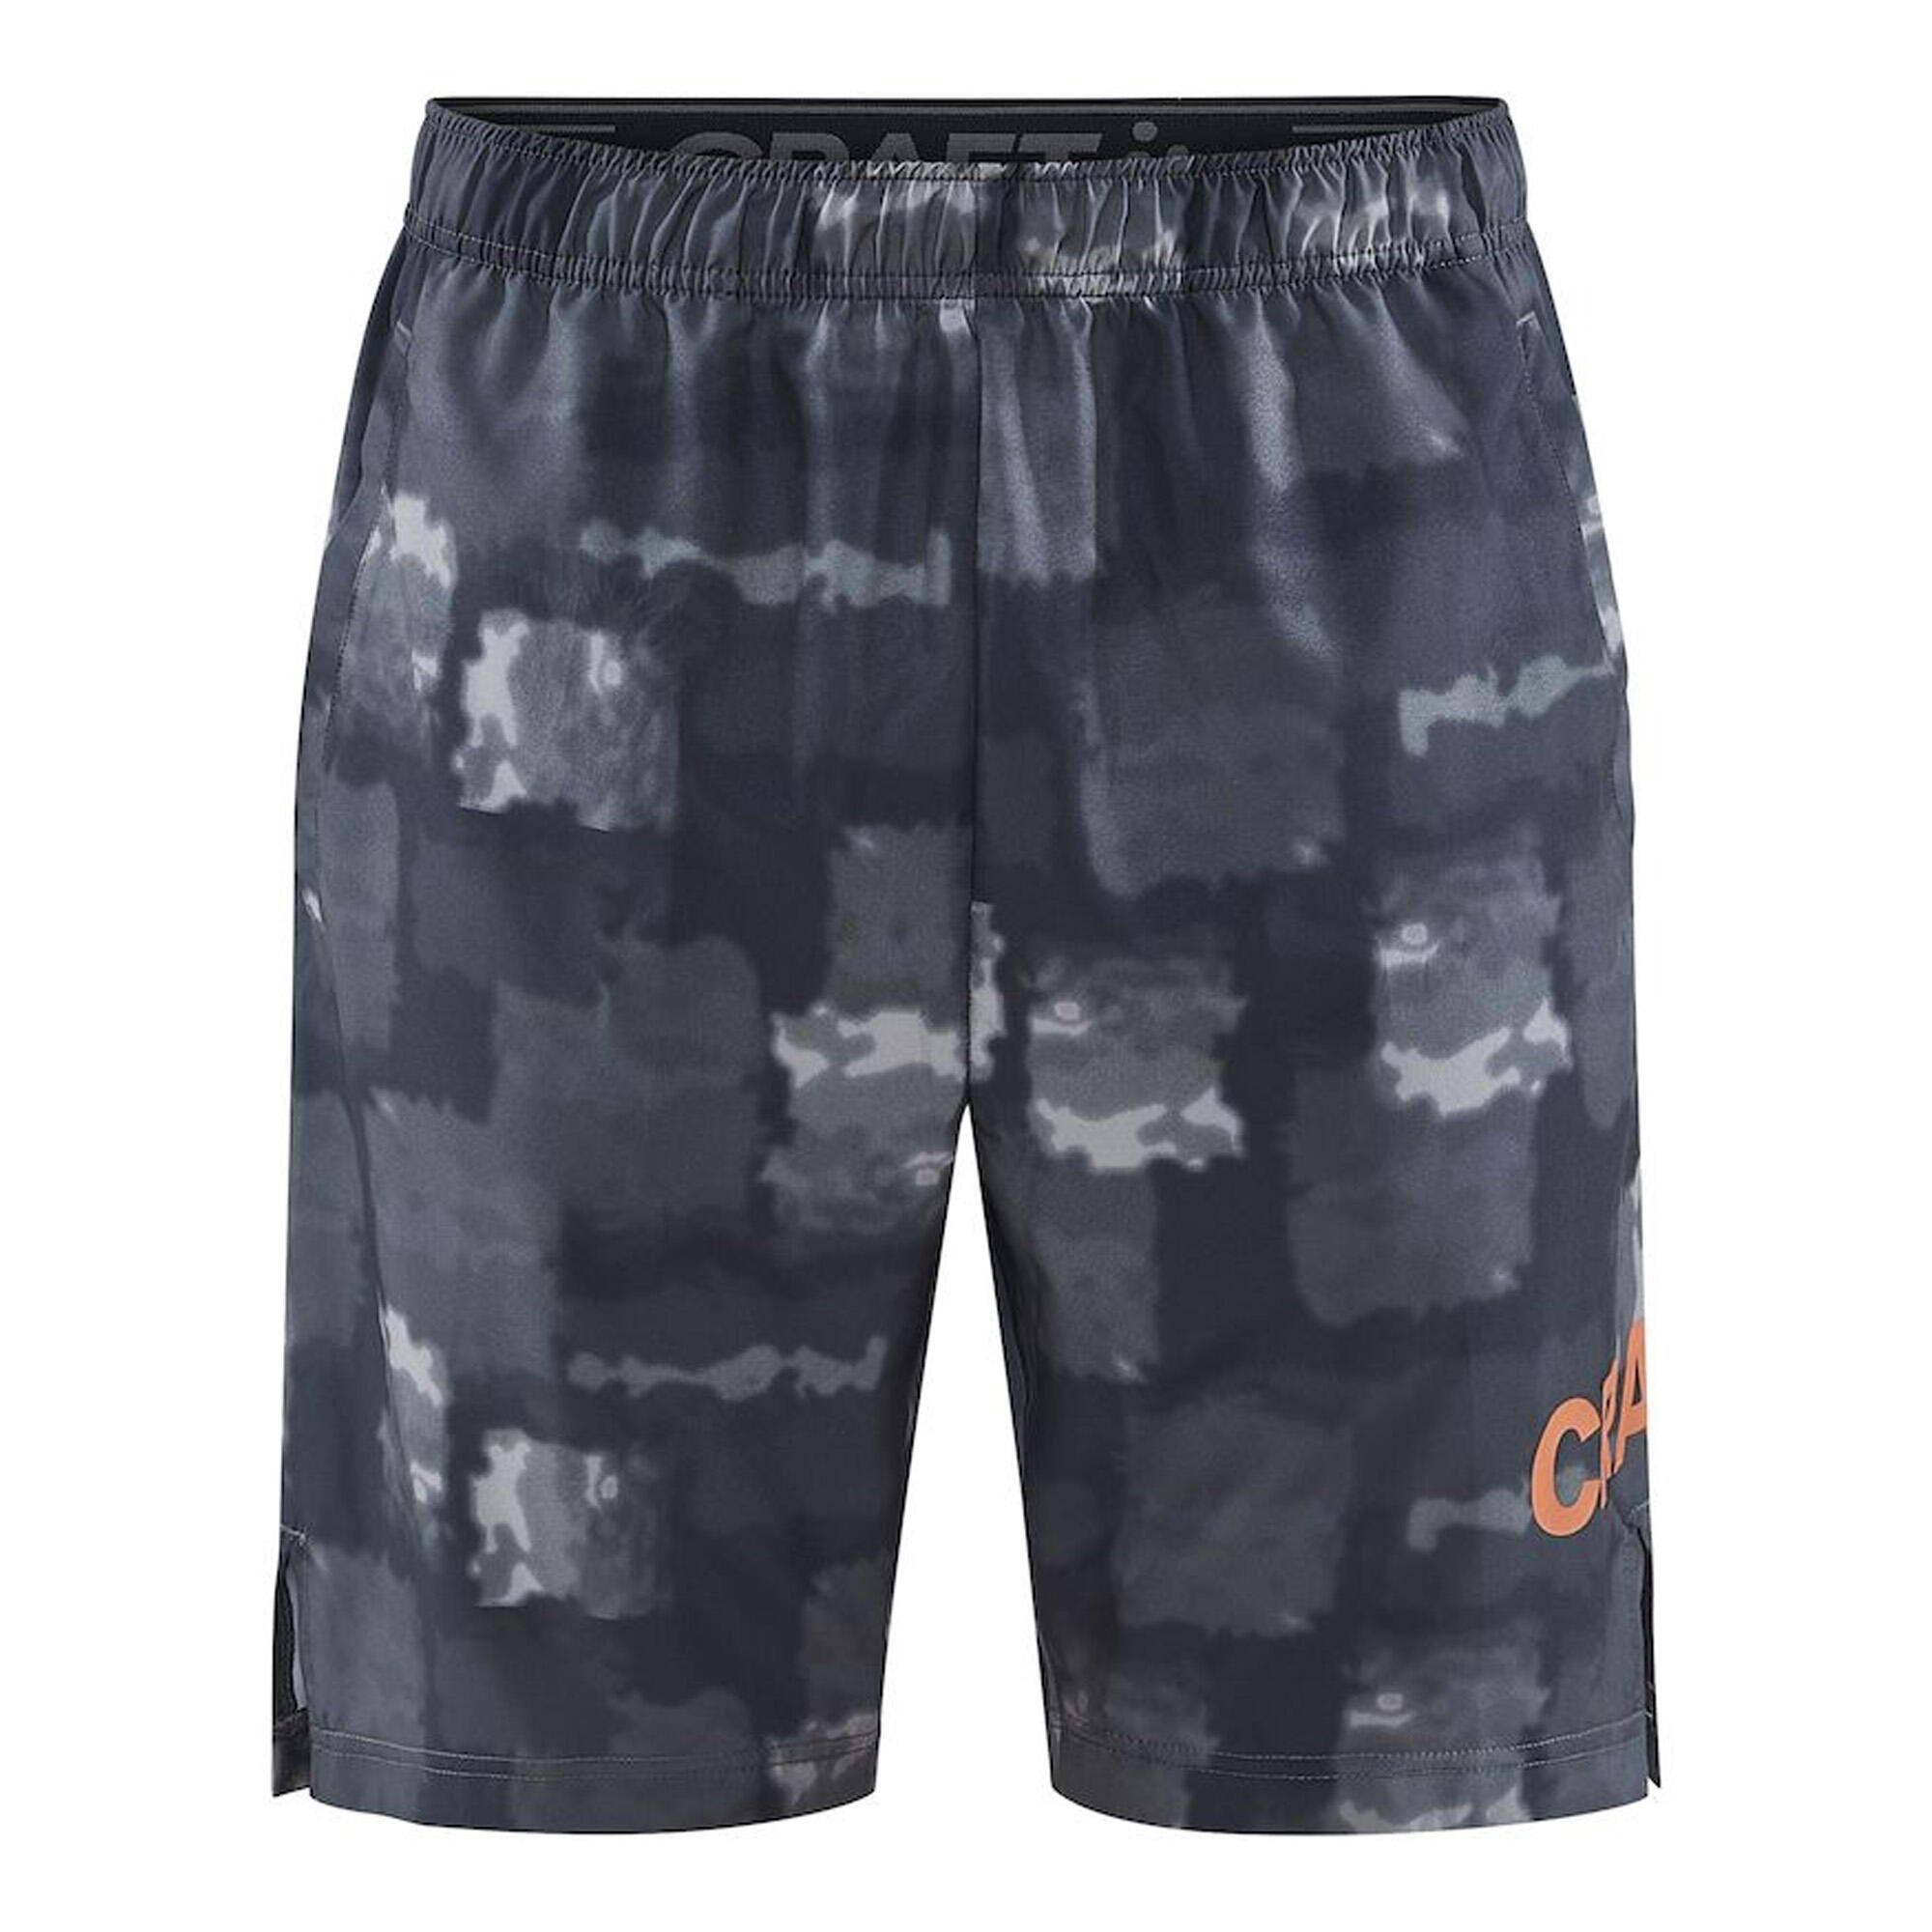 CRAFT Mens Core Charge Marble Effect Loose Fit Shorts (Black/Granite)